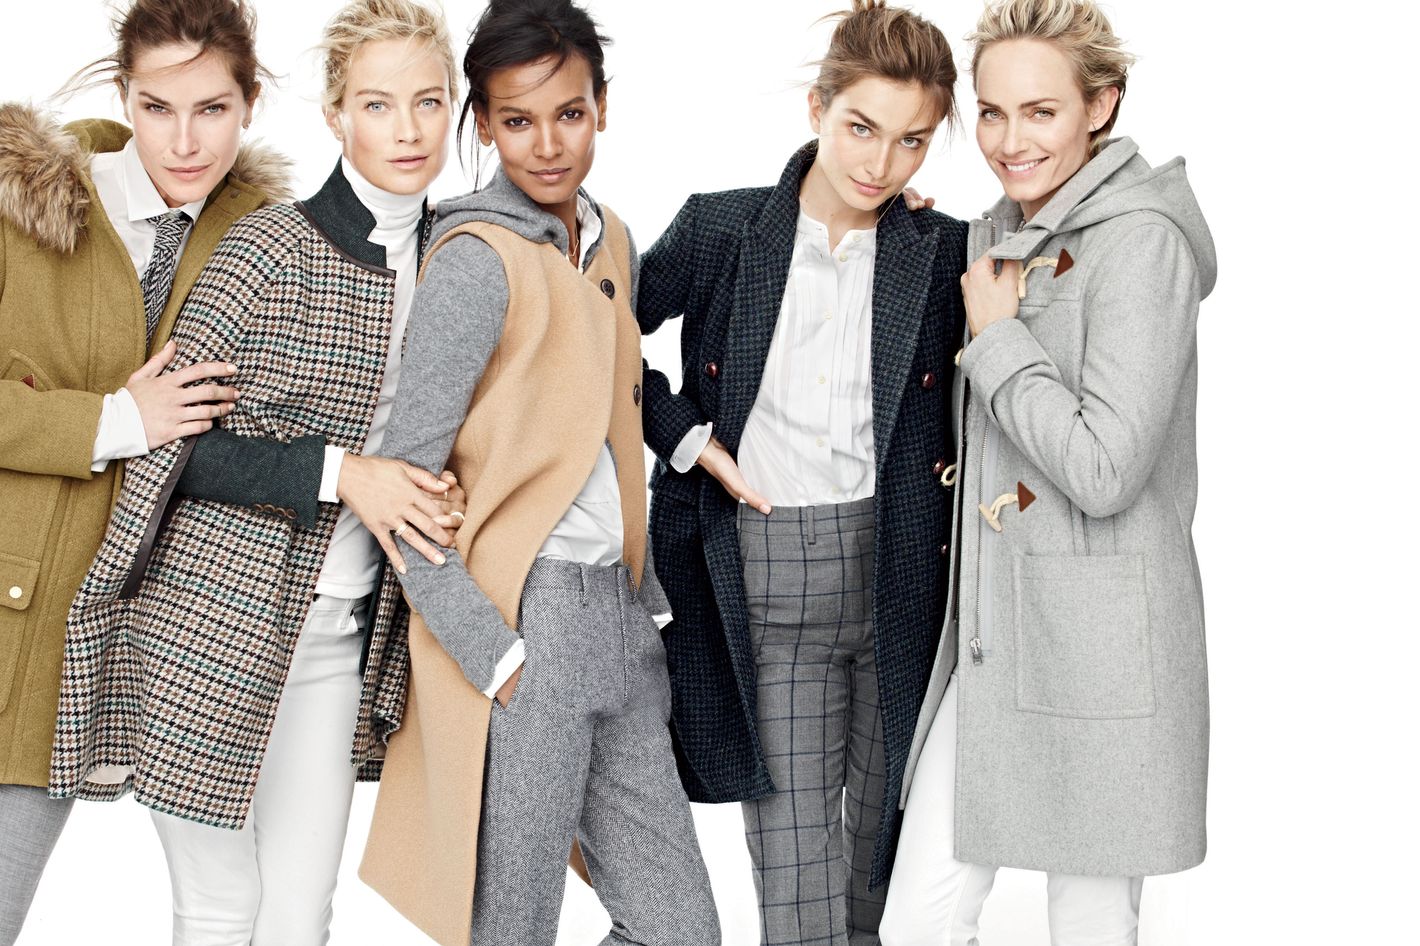 See All the Supermodels in J.Crew's Style Guide